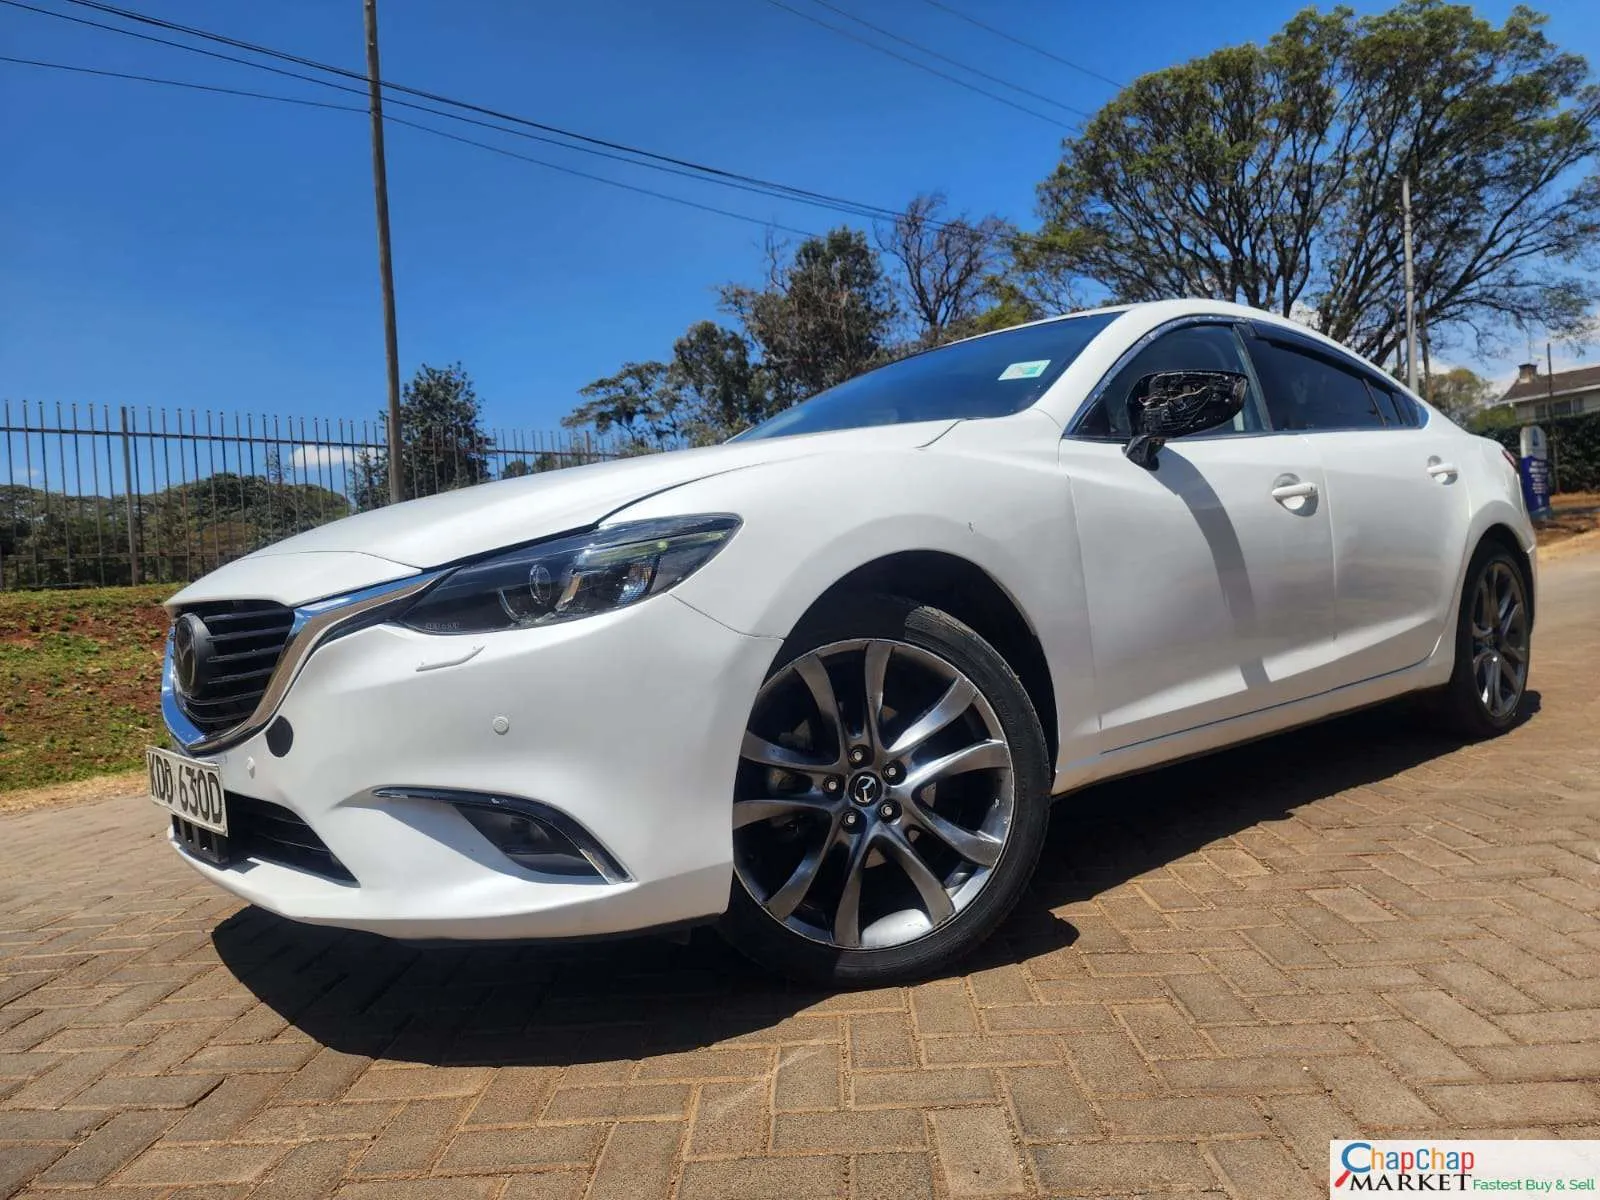 Mazda ATENZA Kenya with sunroof You Pay 30% DEPOSIT TRADE IN OK Mazda atenza for sale in Kenya hire purchase installments EXCLUSIVE